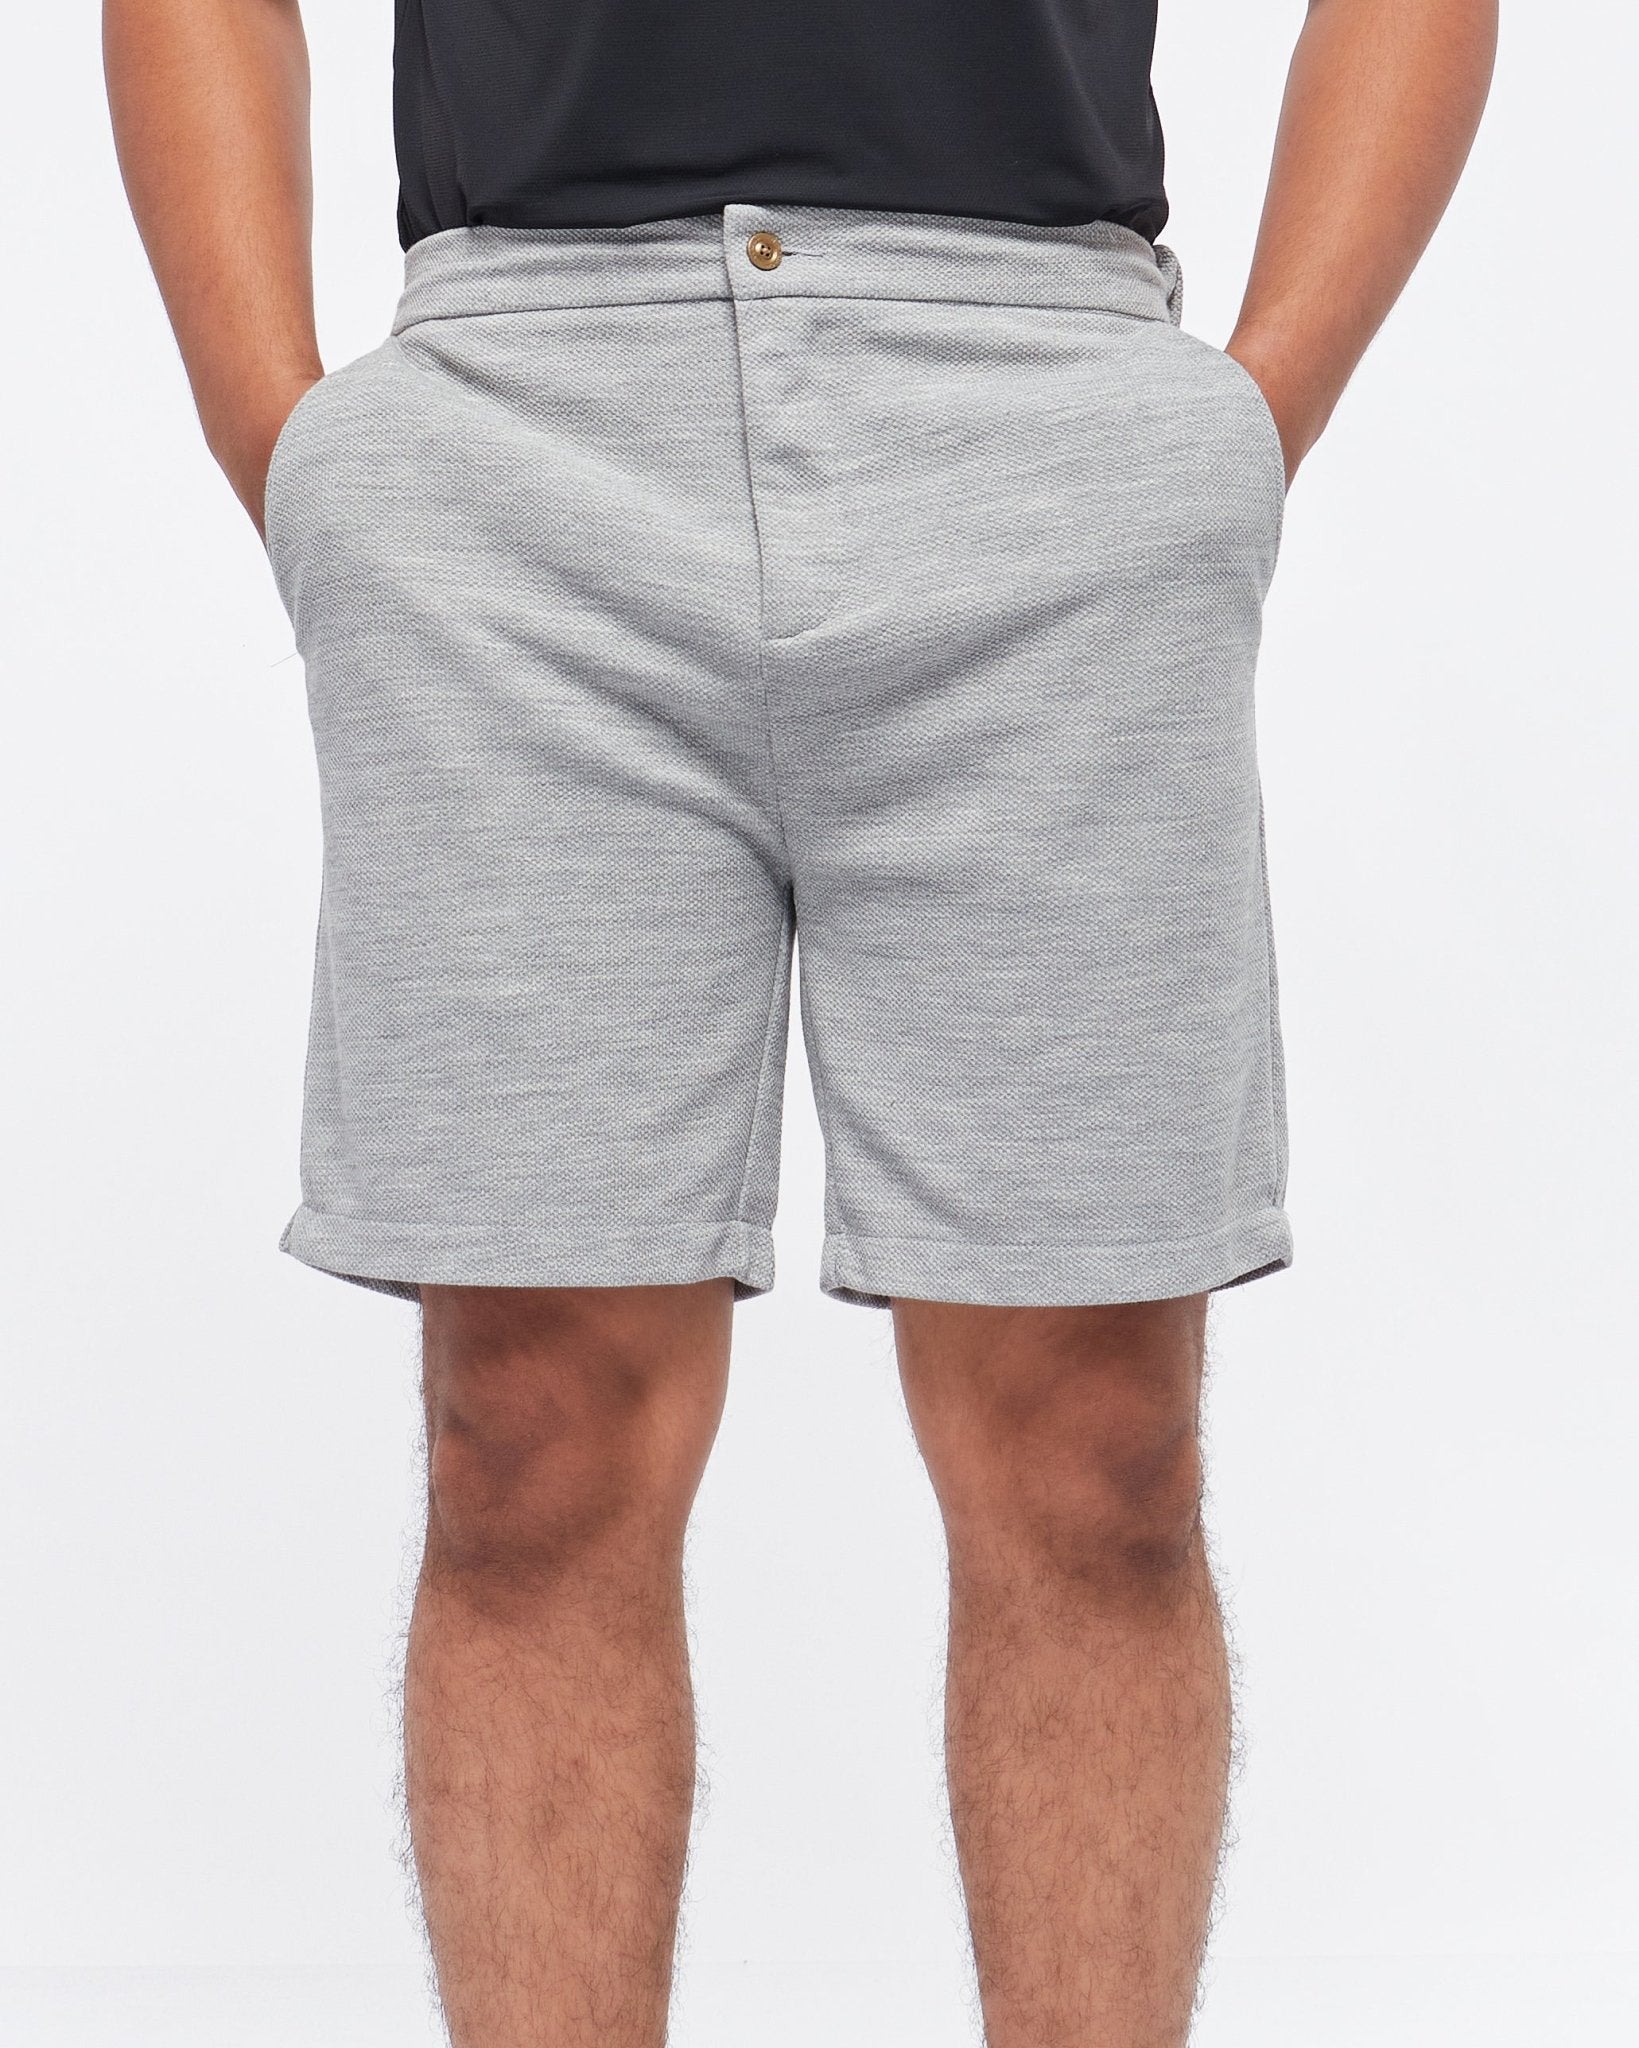 MOI OUTFIT-Casual FIt Men Short 17.50